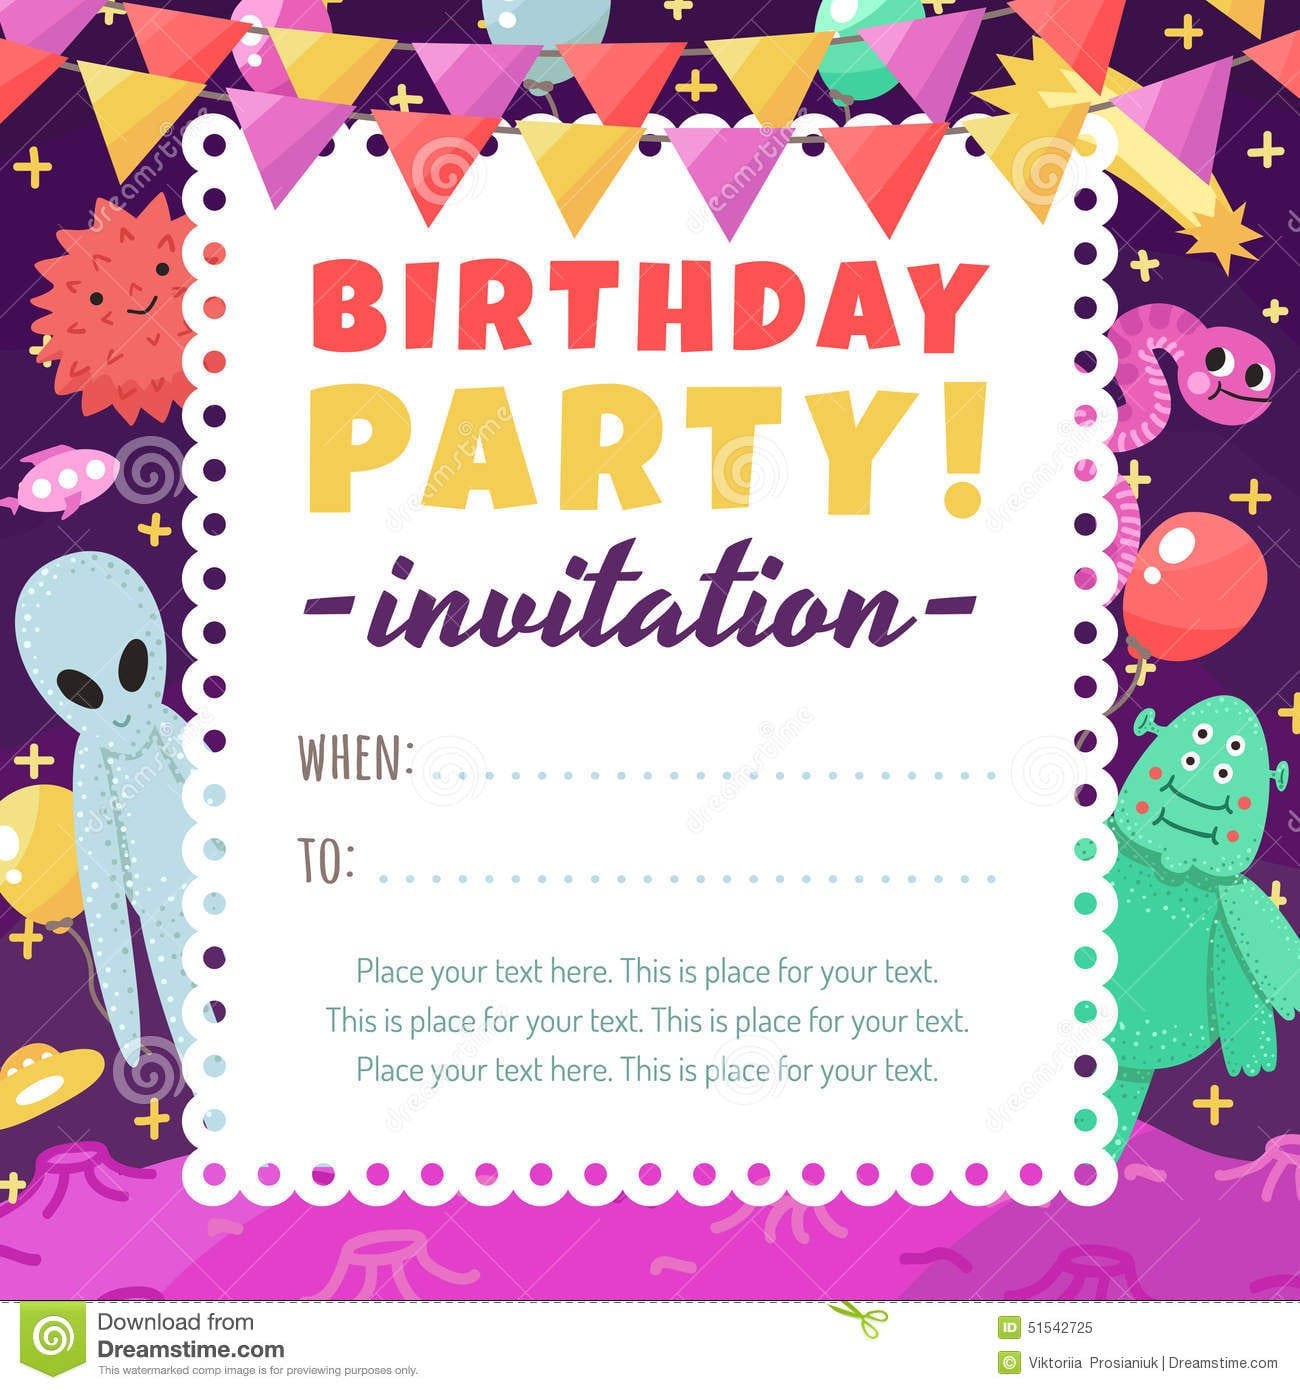 Birthday Party Funny And Cute Space Invitation With Cartoon Aliens